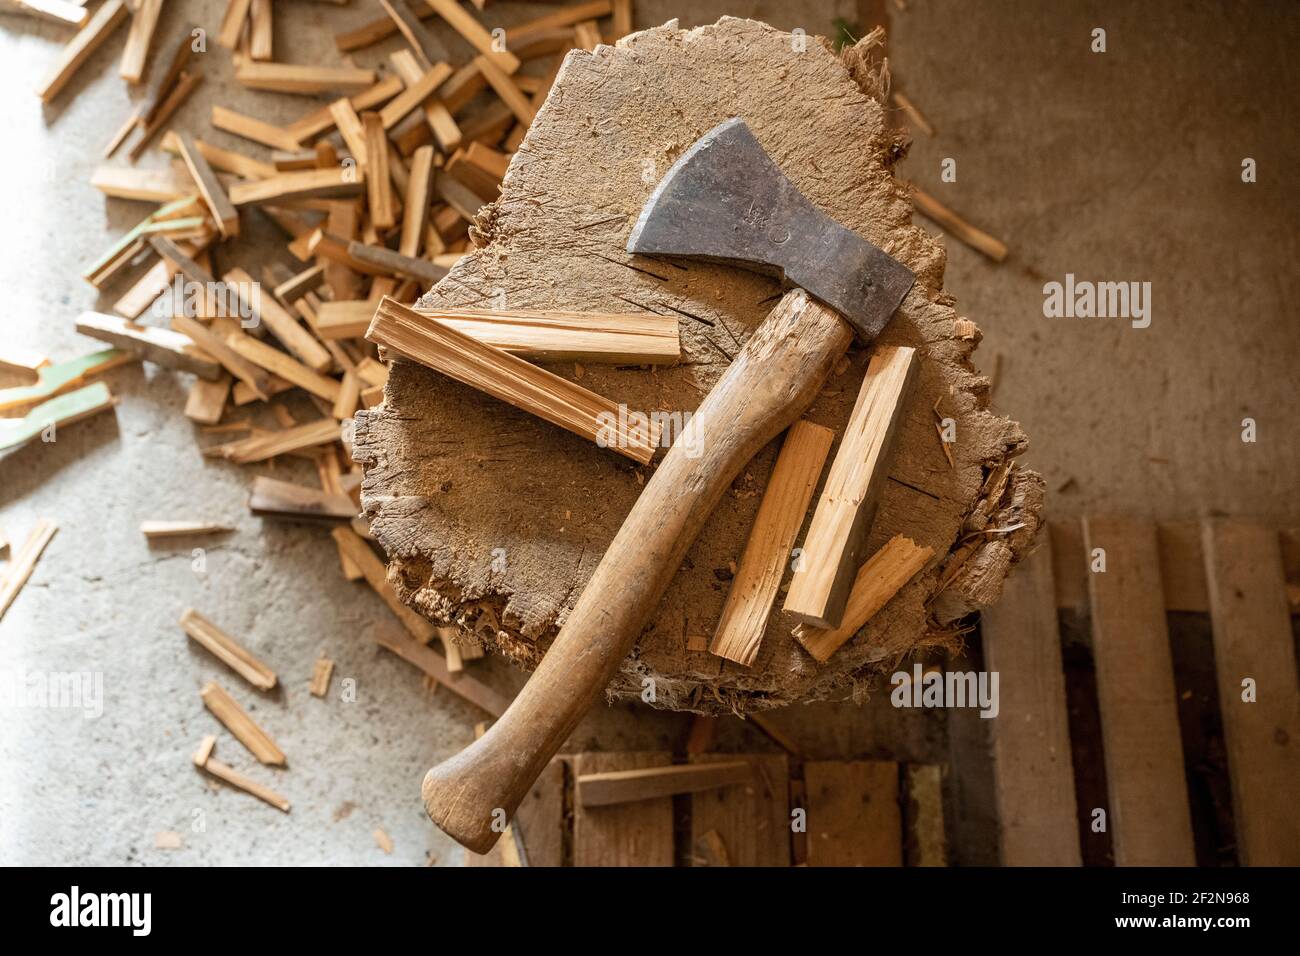 Chopping block with ax and split wood. Stock Photo